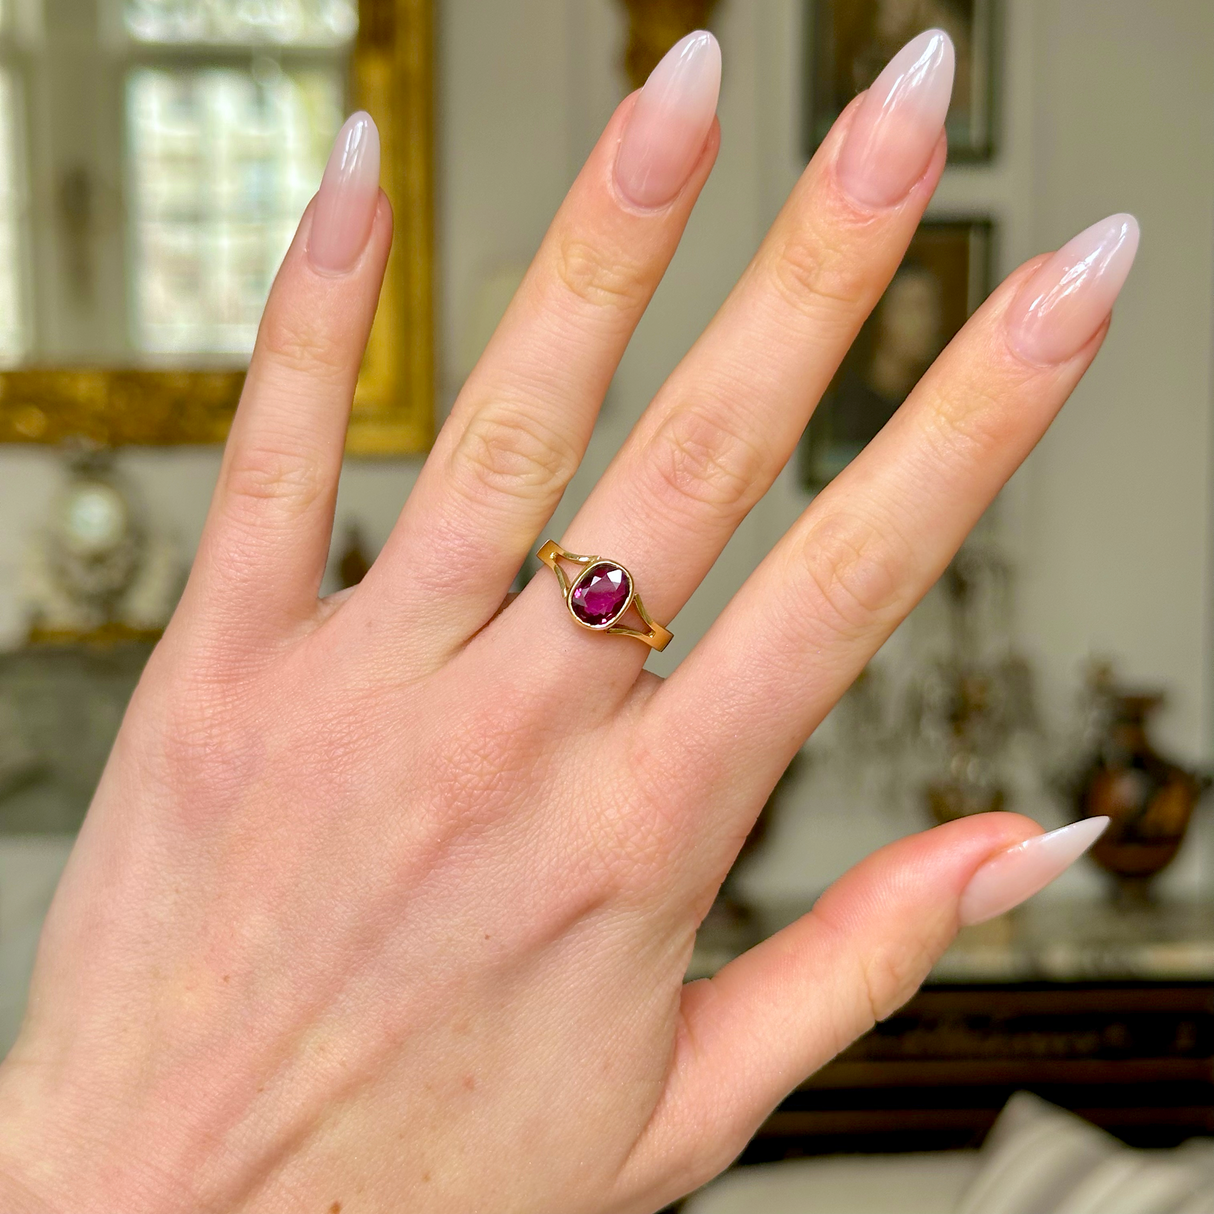 Vintage single-stone ruby and yellow gold ring, worn on hand. 